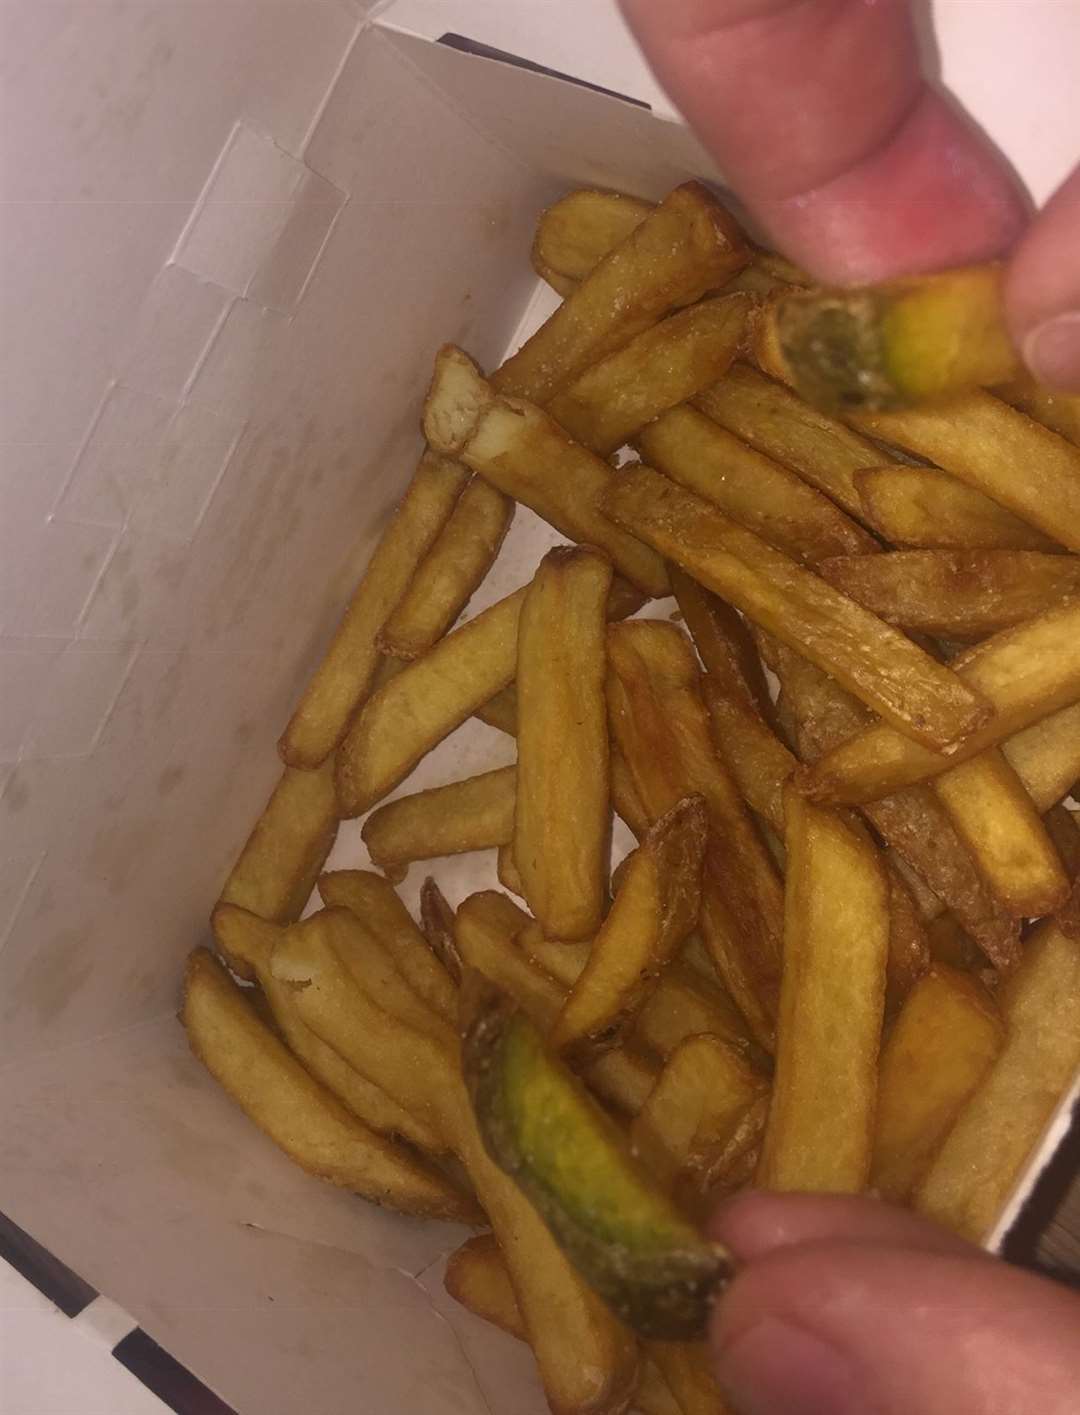 Teenager says he won't eat KFC again after being served these chips